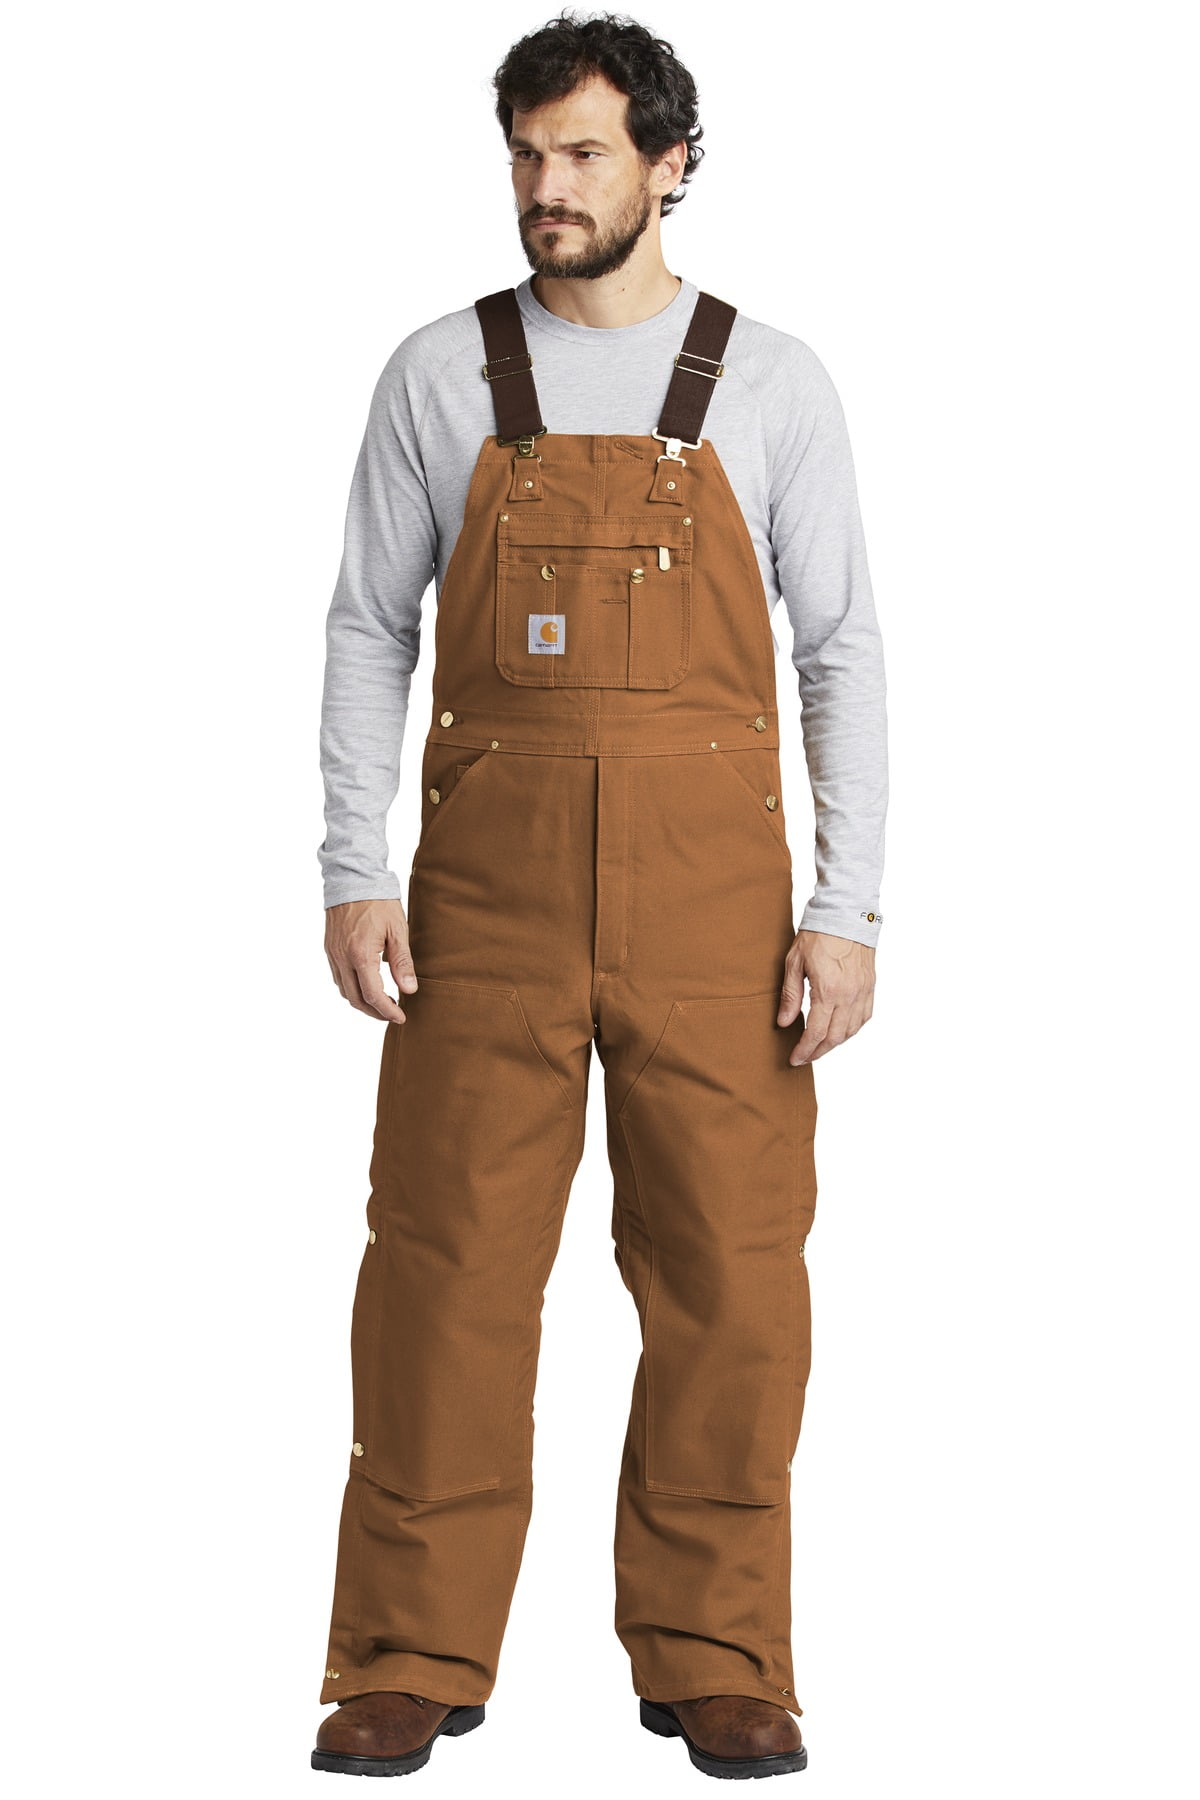 Carhartt Mens Quilt Lined Zip To Thigh Bib Overalls R41